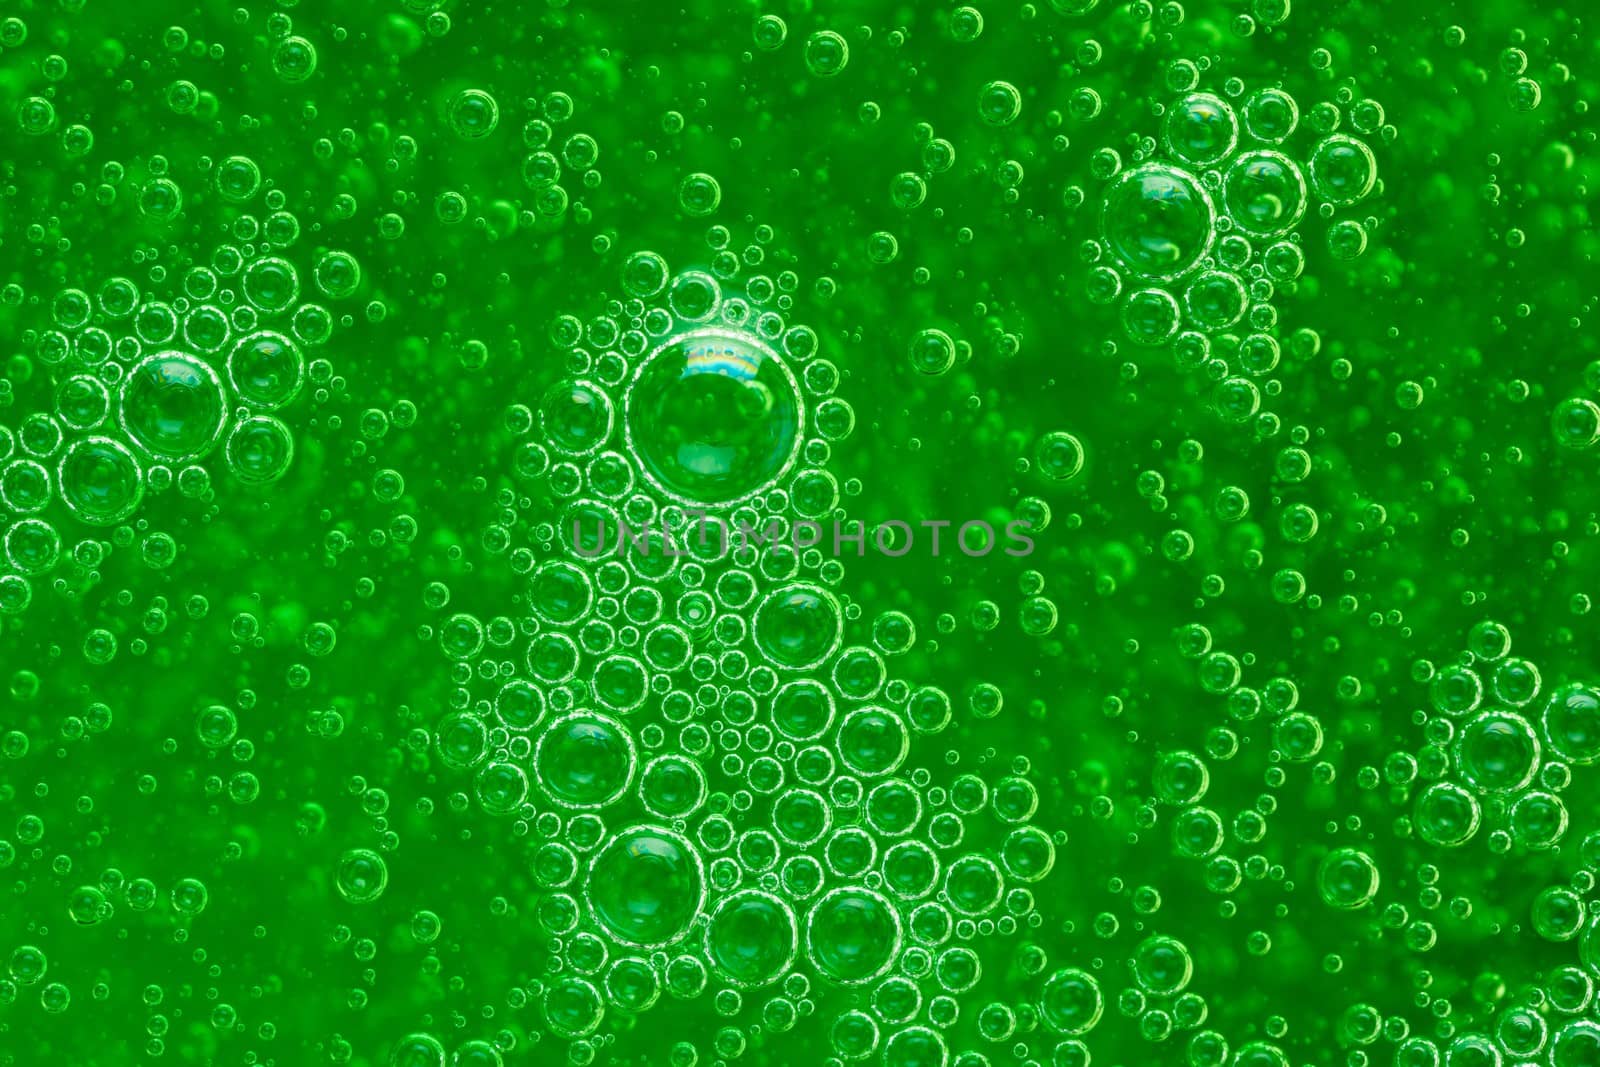 abstract liquid soap bubbles green background